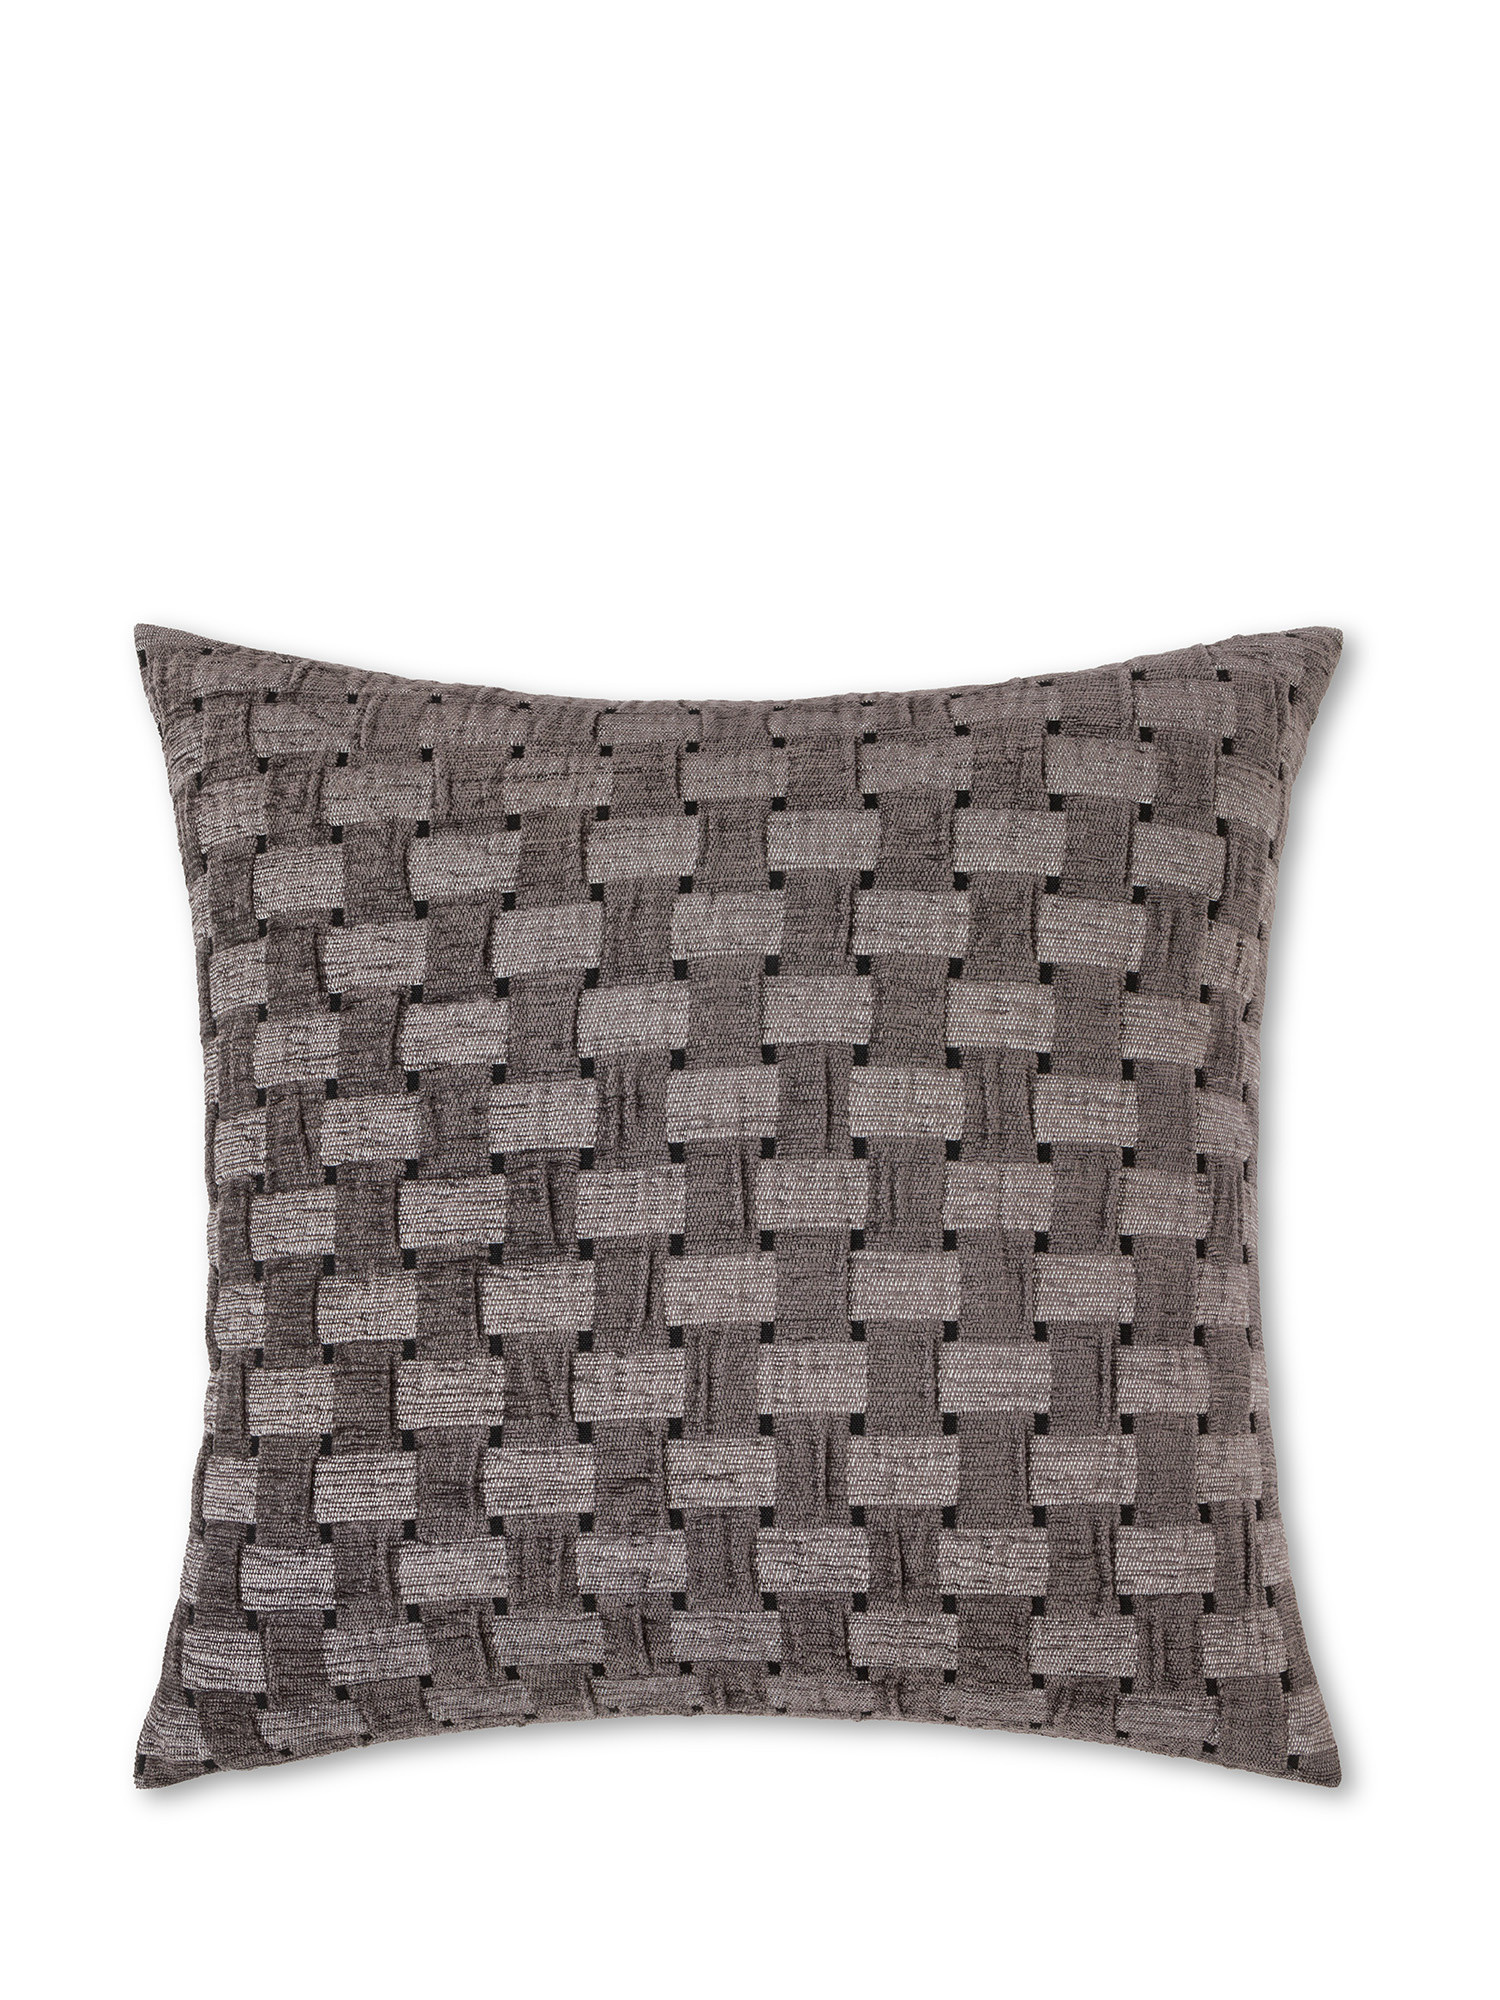 Jacquard cushion with woven pattern 45x45cm, Grey, large image number 0